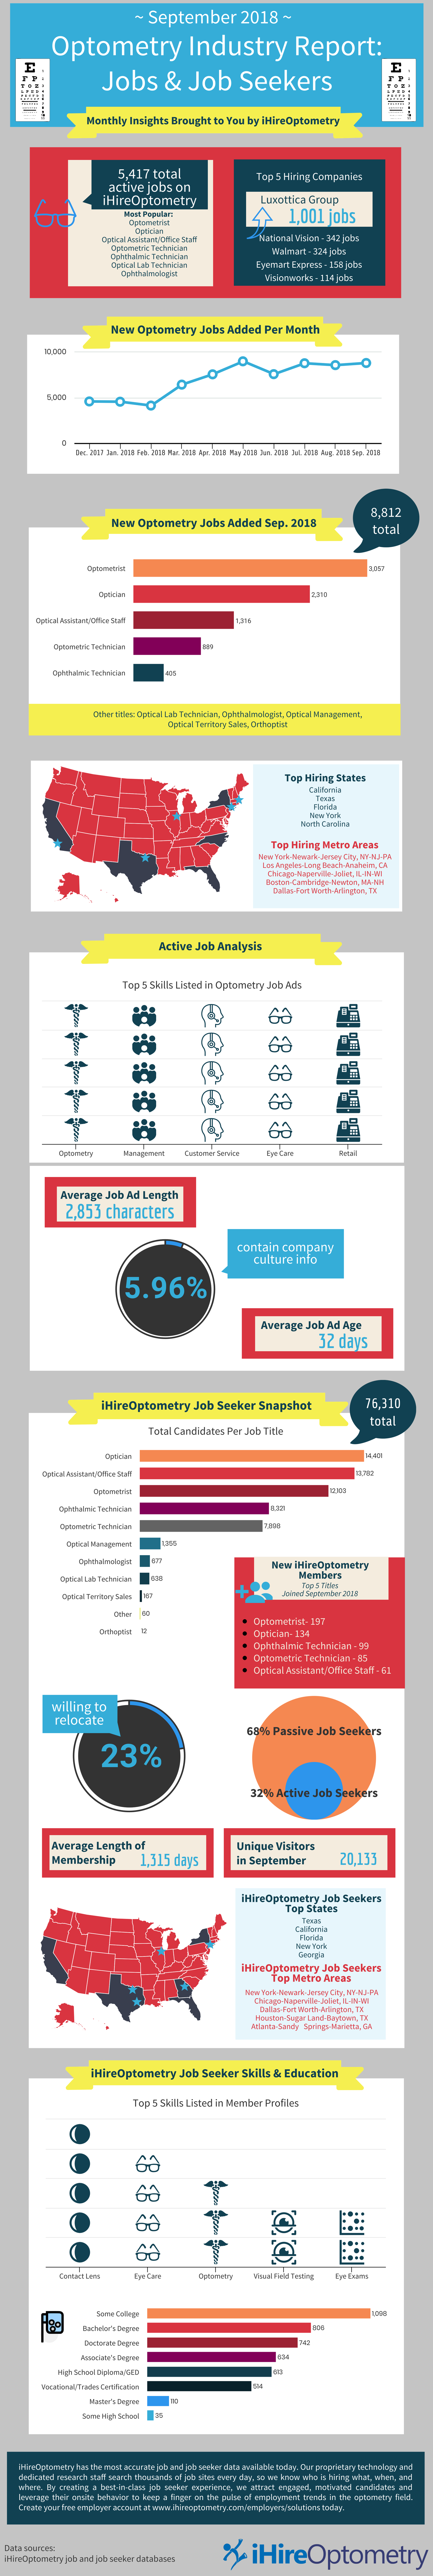 iHireOptometry’s eye care industry overview for September 2018. Infographic.